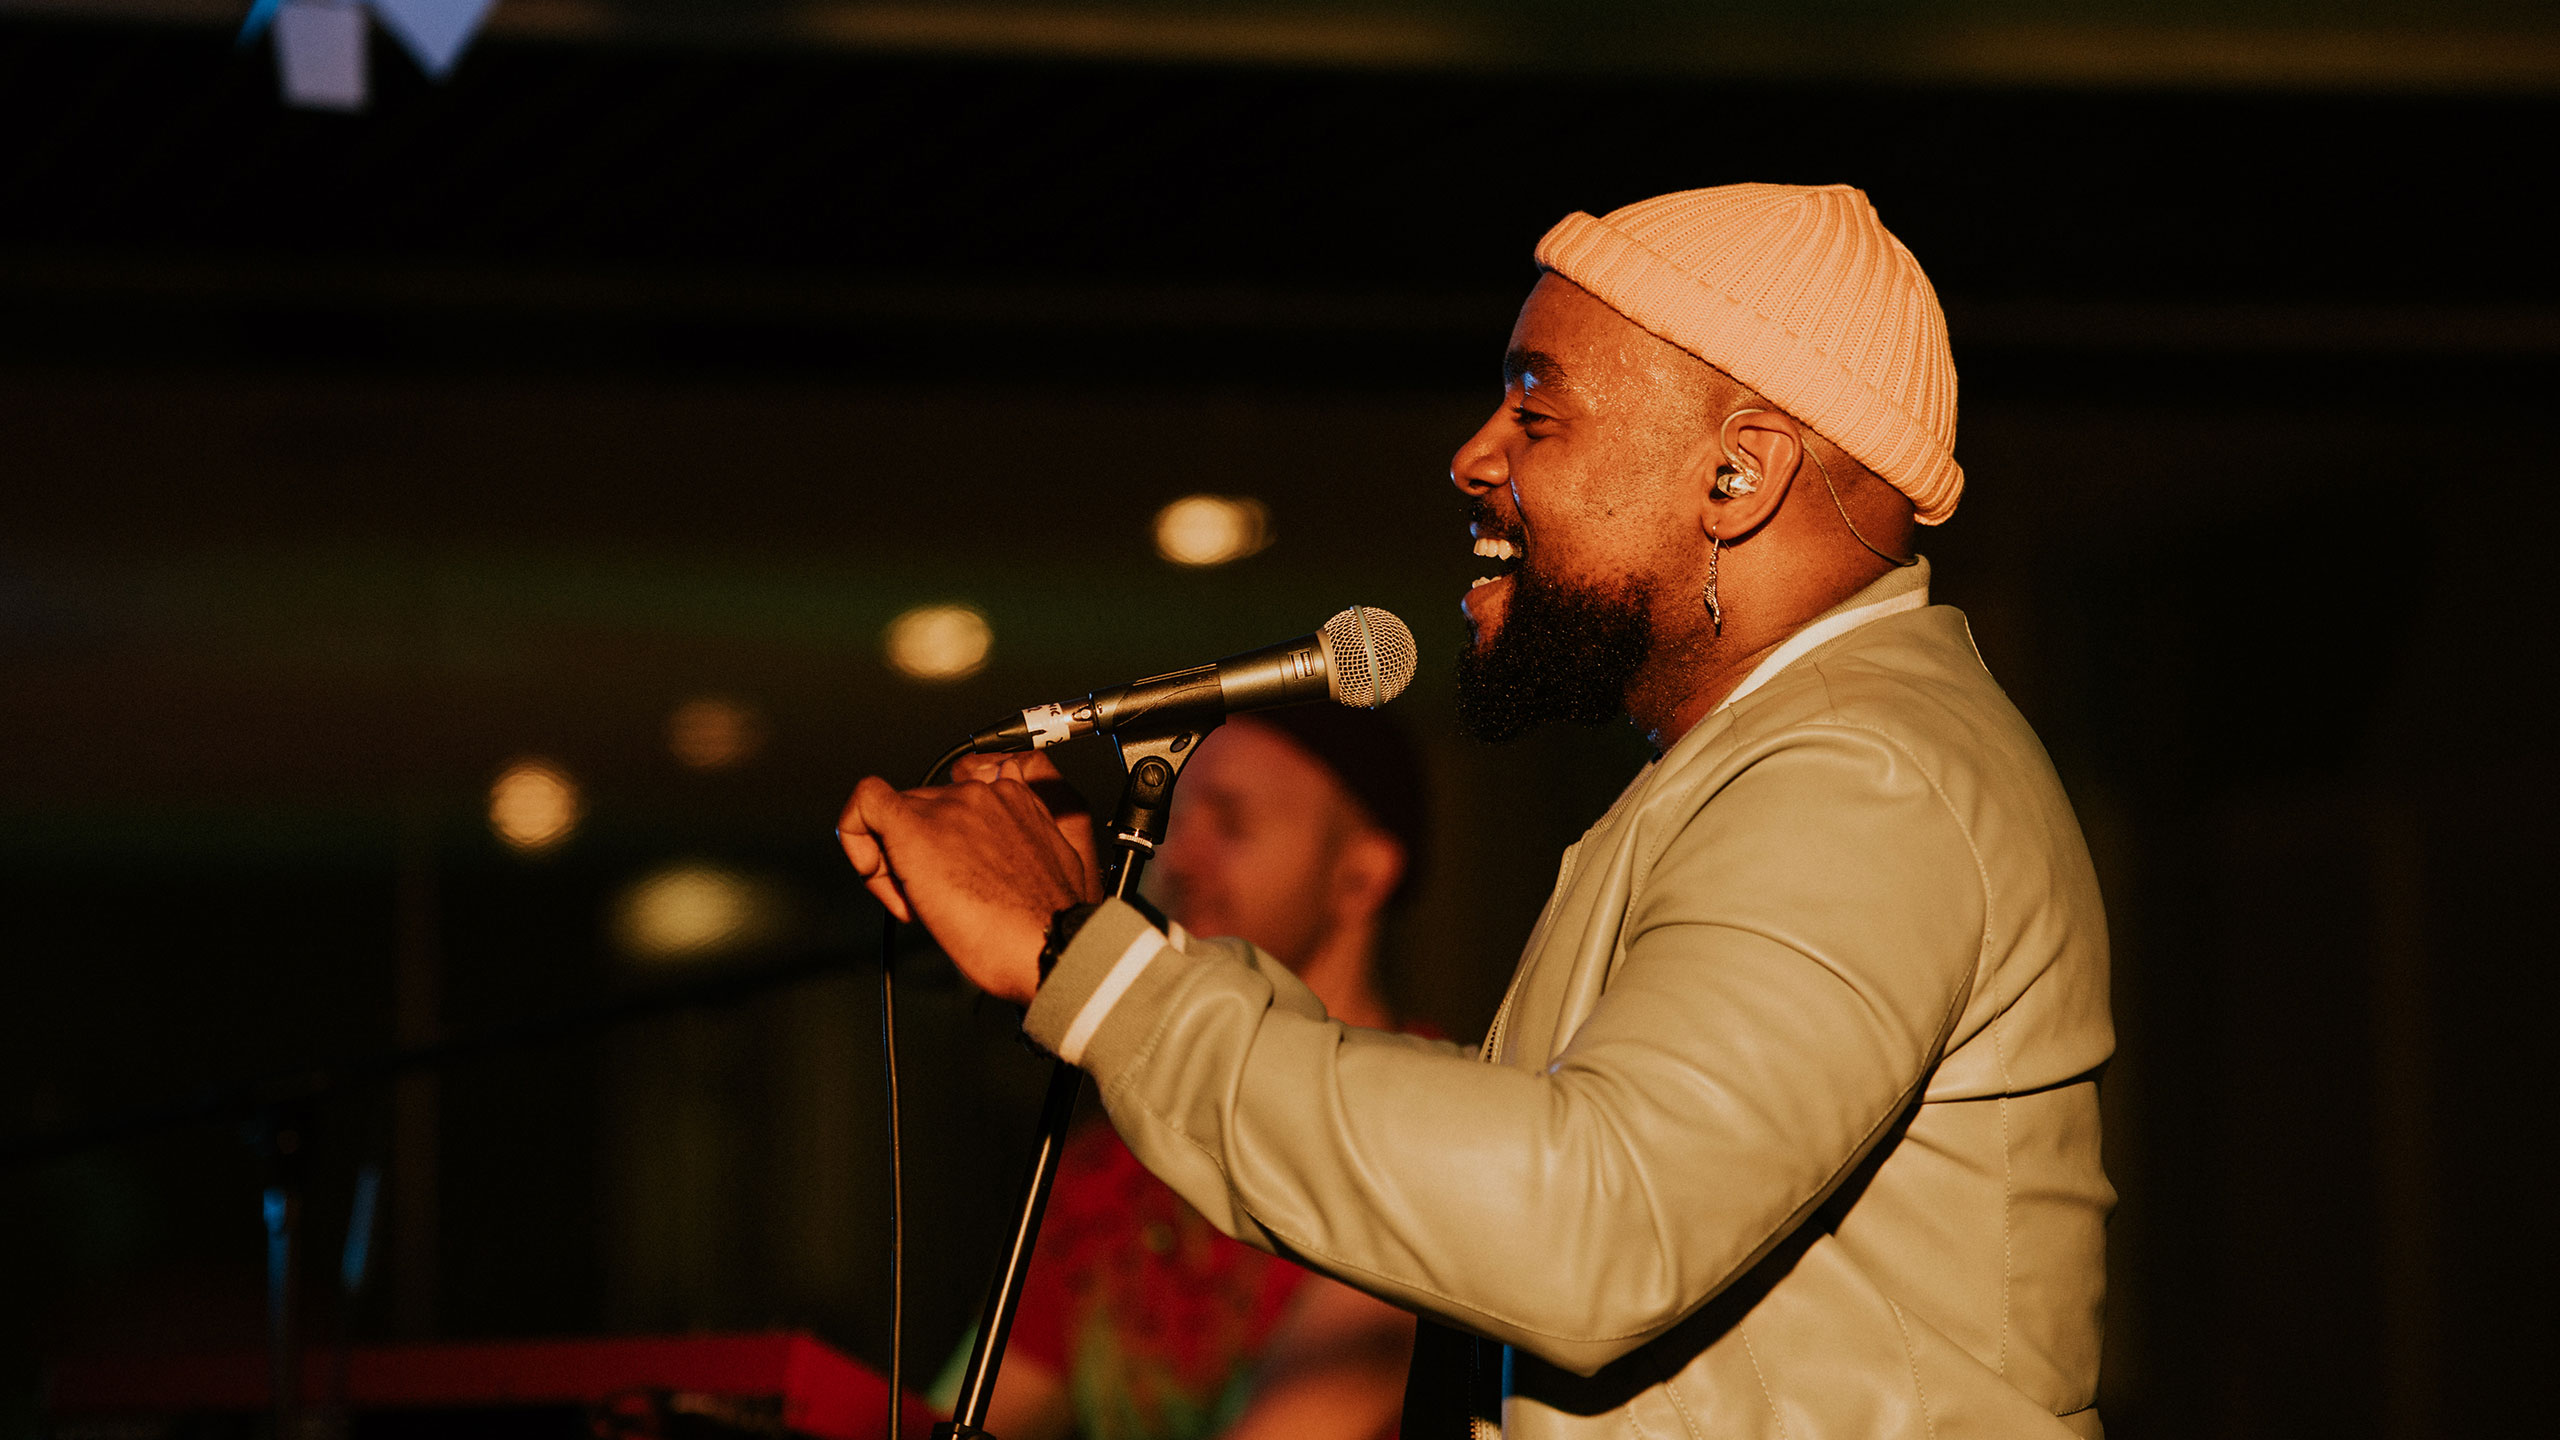 Jodie Abacus, wearing an orange beanie hat and grey jacket, dances and sings into the microphone at PRS for Music Presents